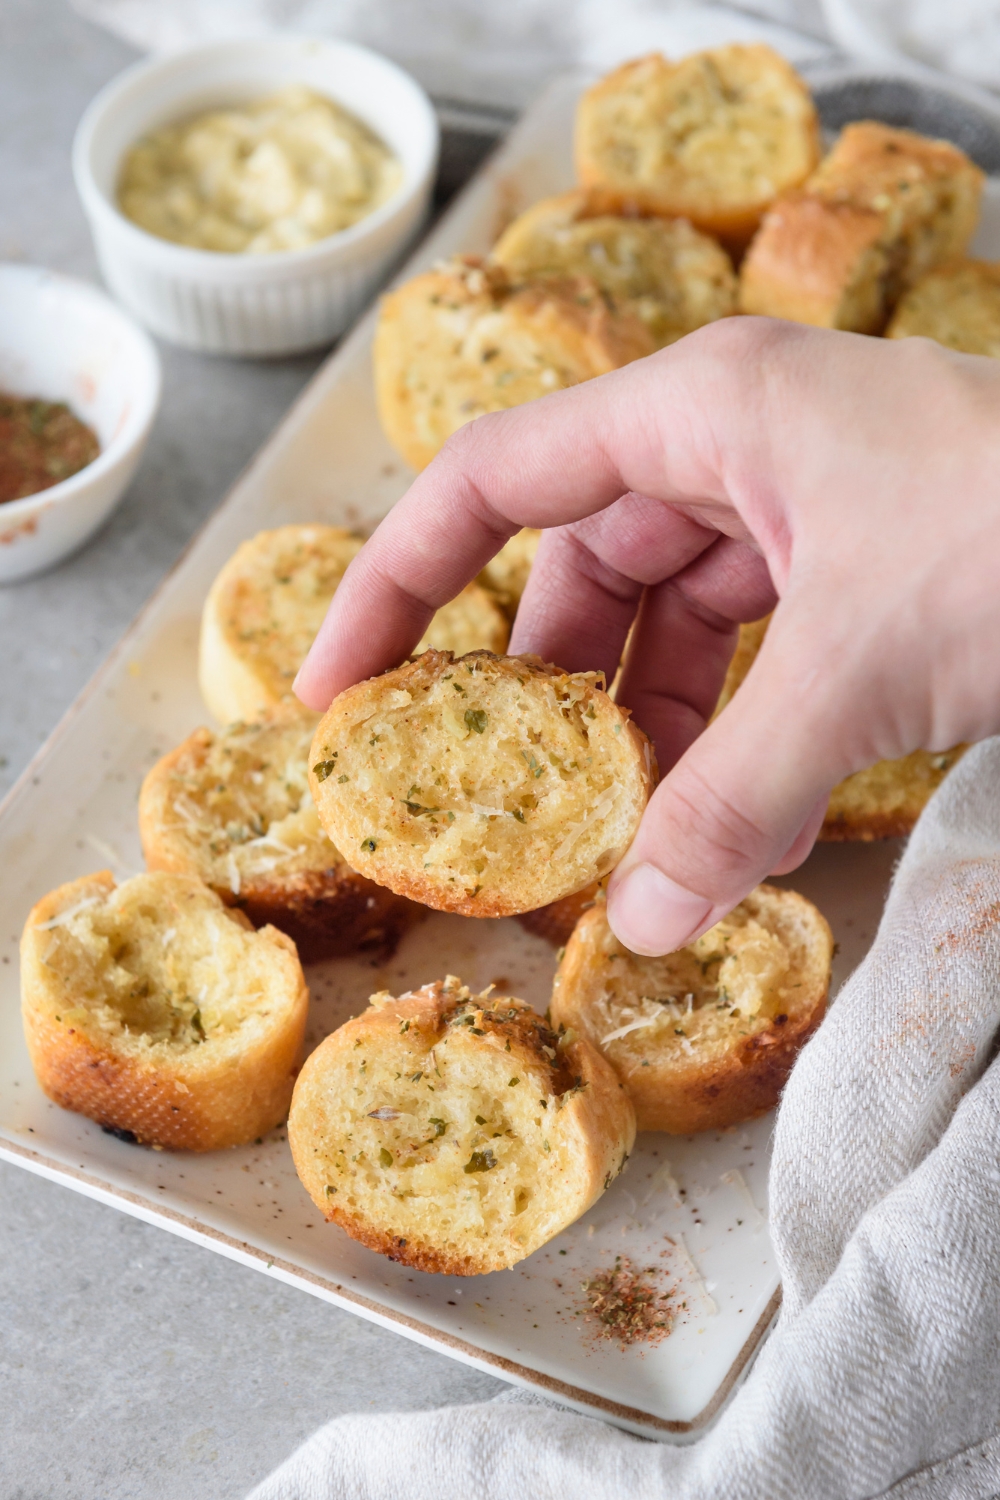 A hand picking up a slice of baguette garlic bread from a plate filled with slices of seasoned garlic bread.